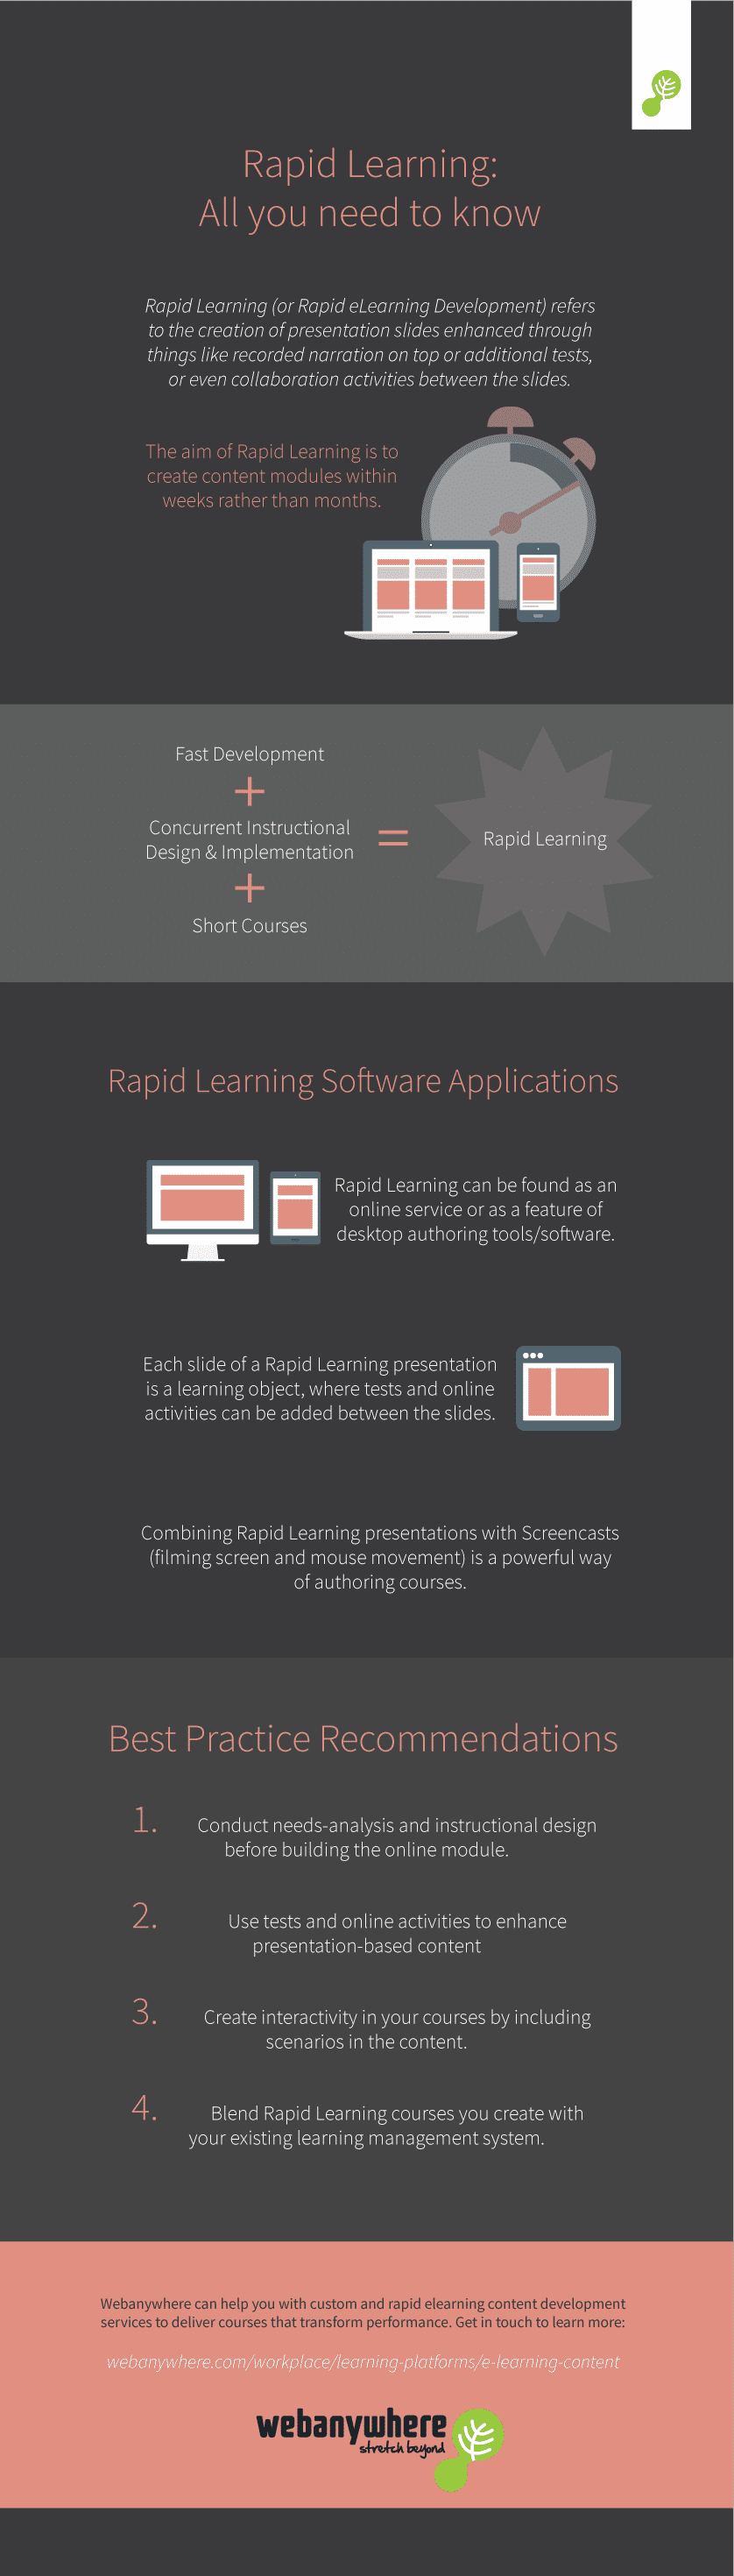 Rapid eLearning Infographic